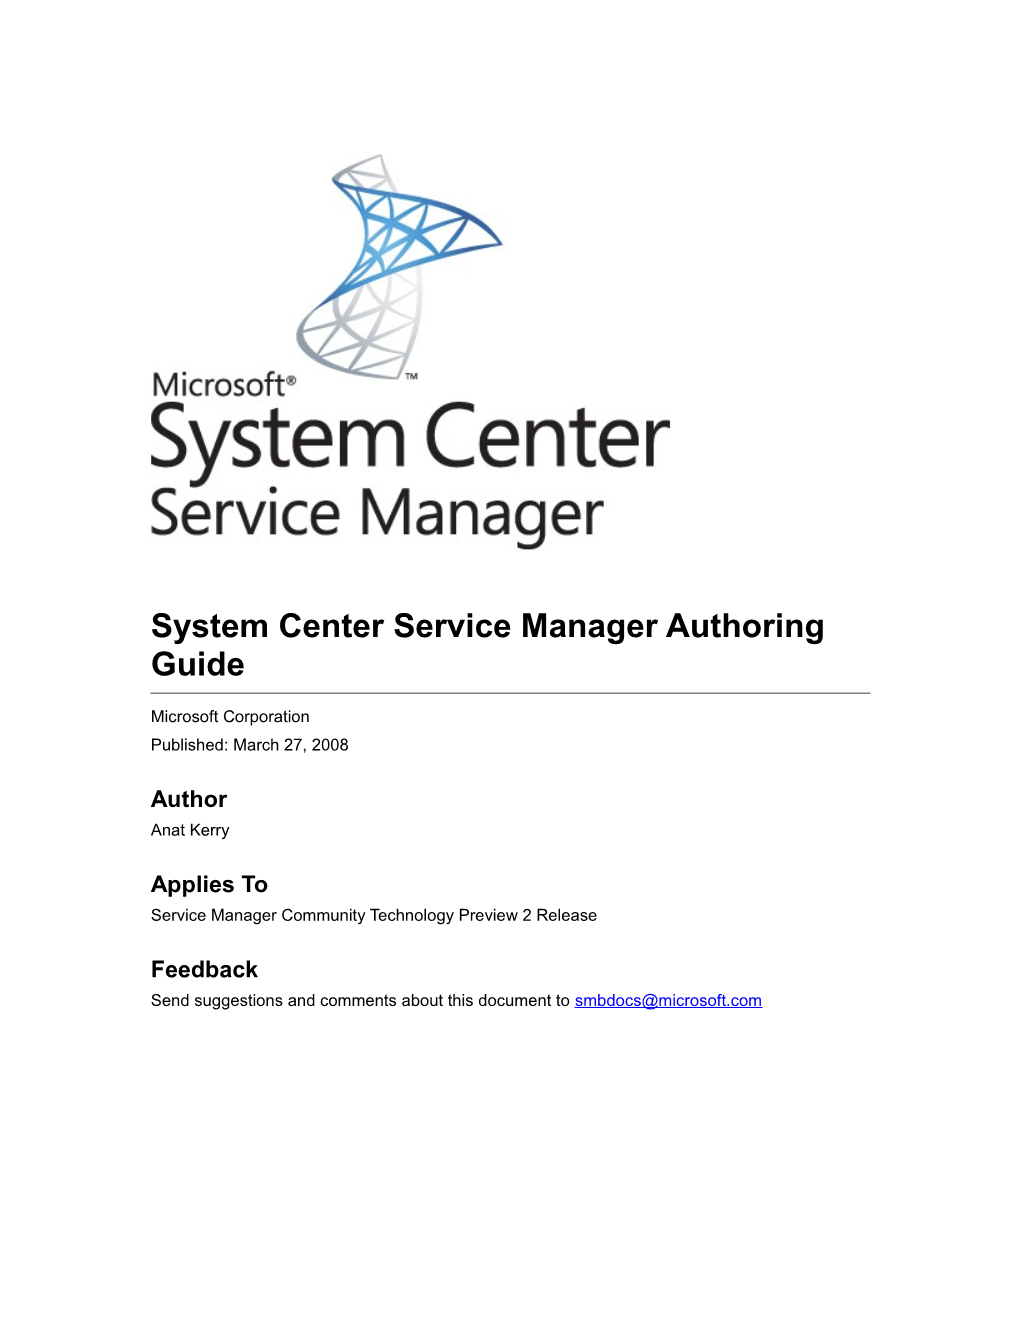 System Center Service Manager Authoring Guide